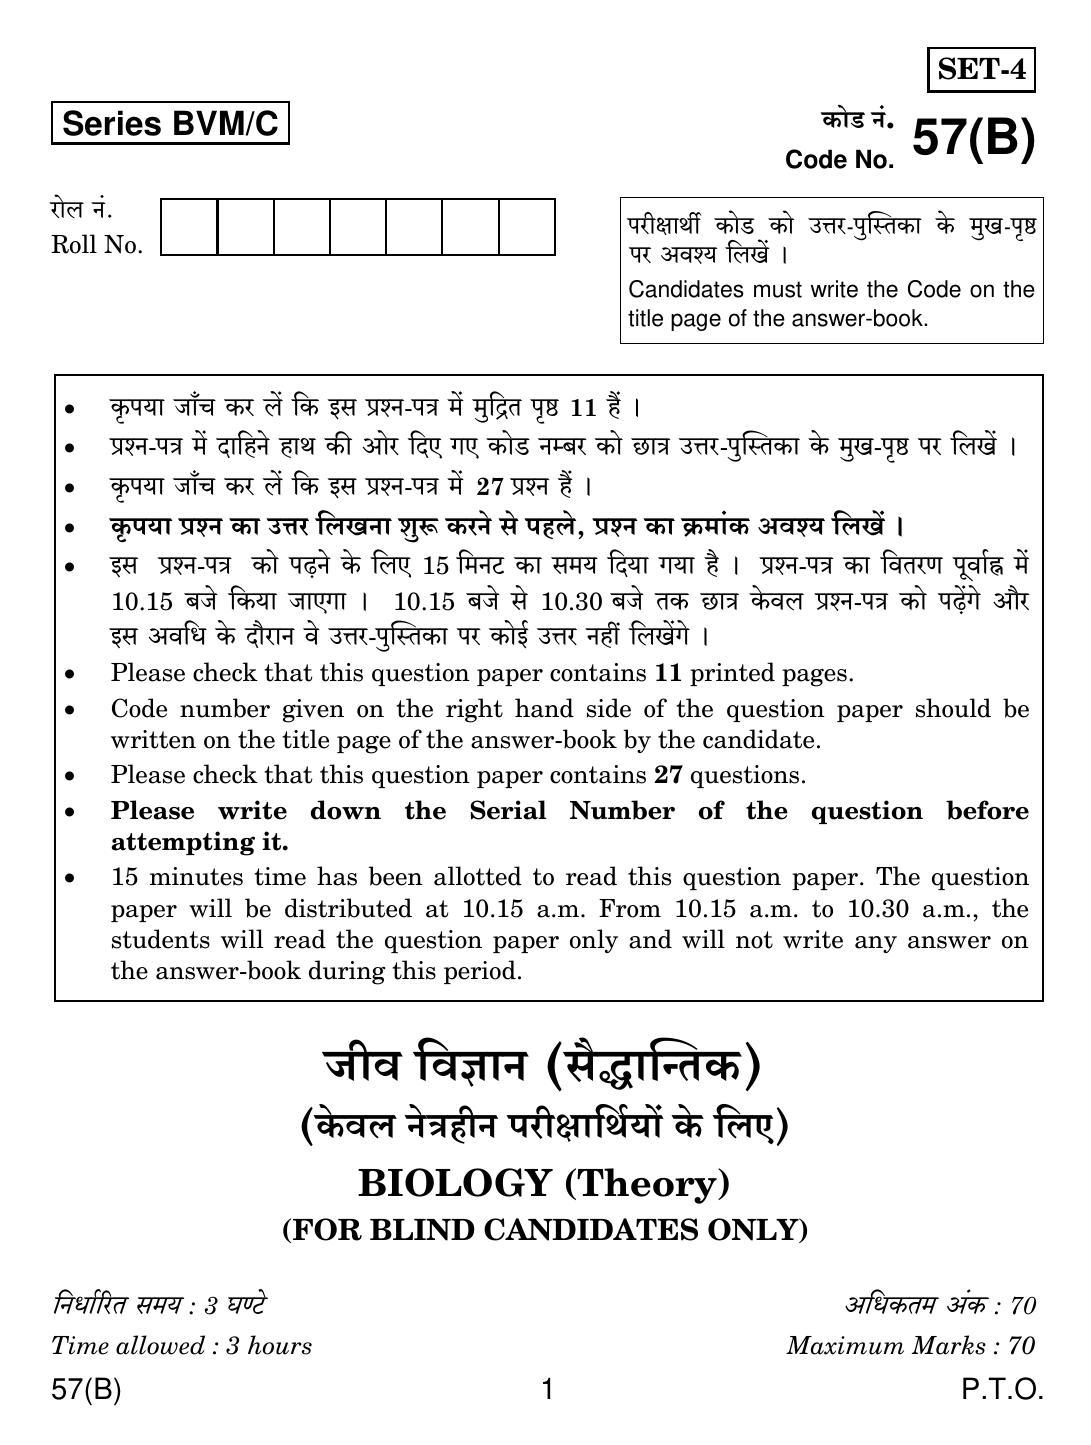 CBSE Class 12 57(B) BIOLOGY 2019 Compartment Question Paper - Page 1